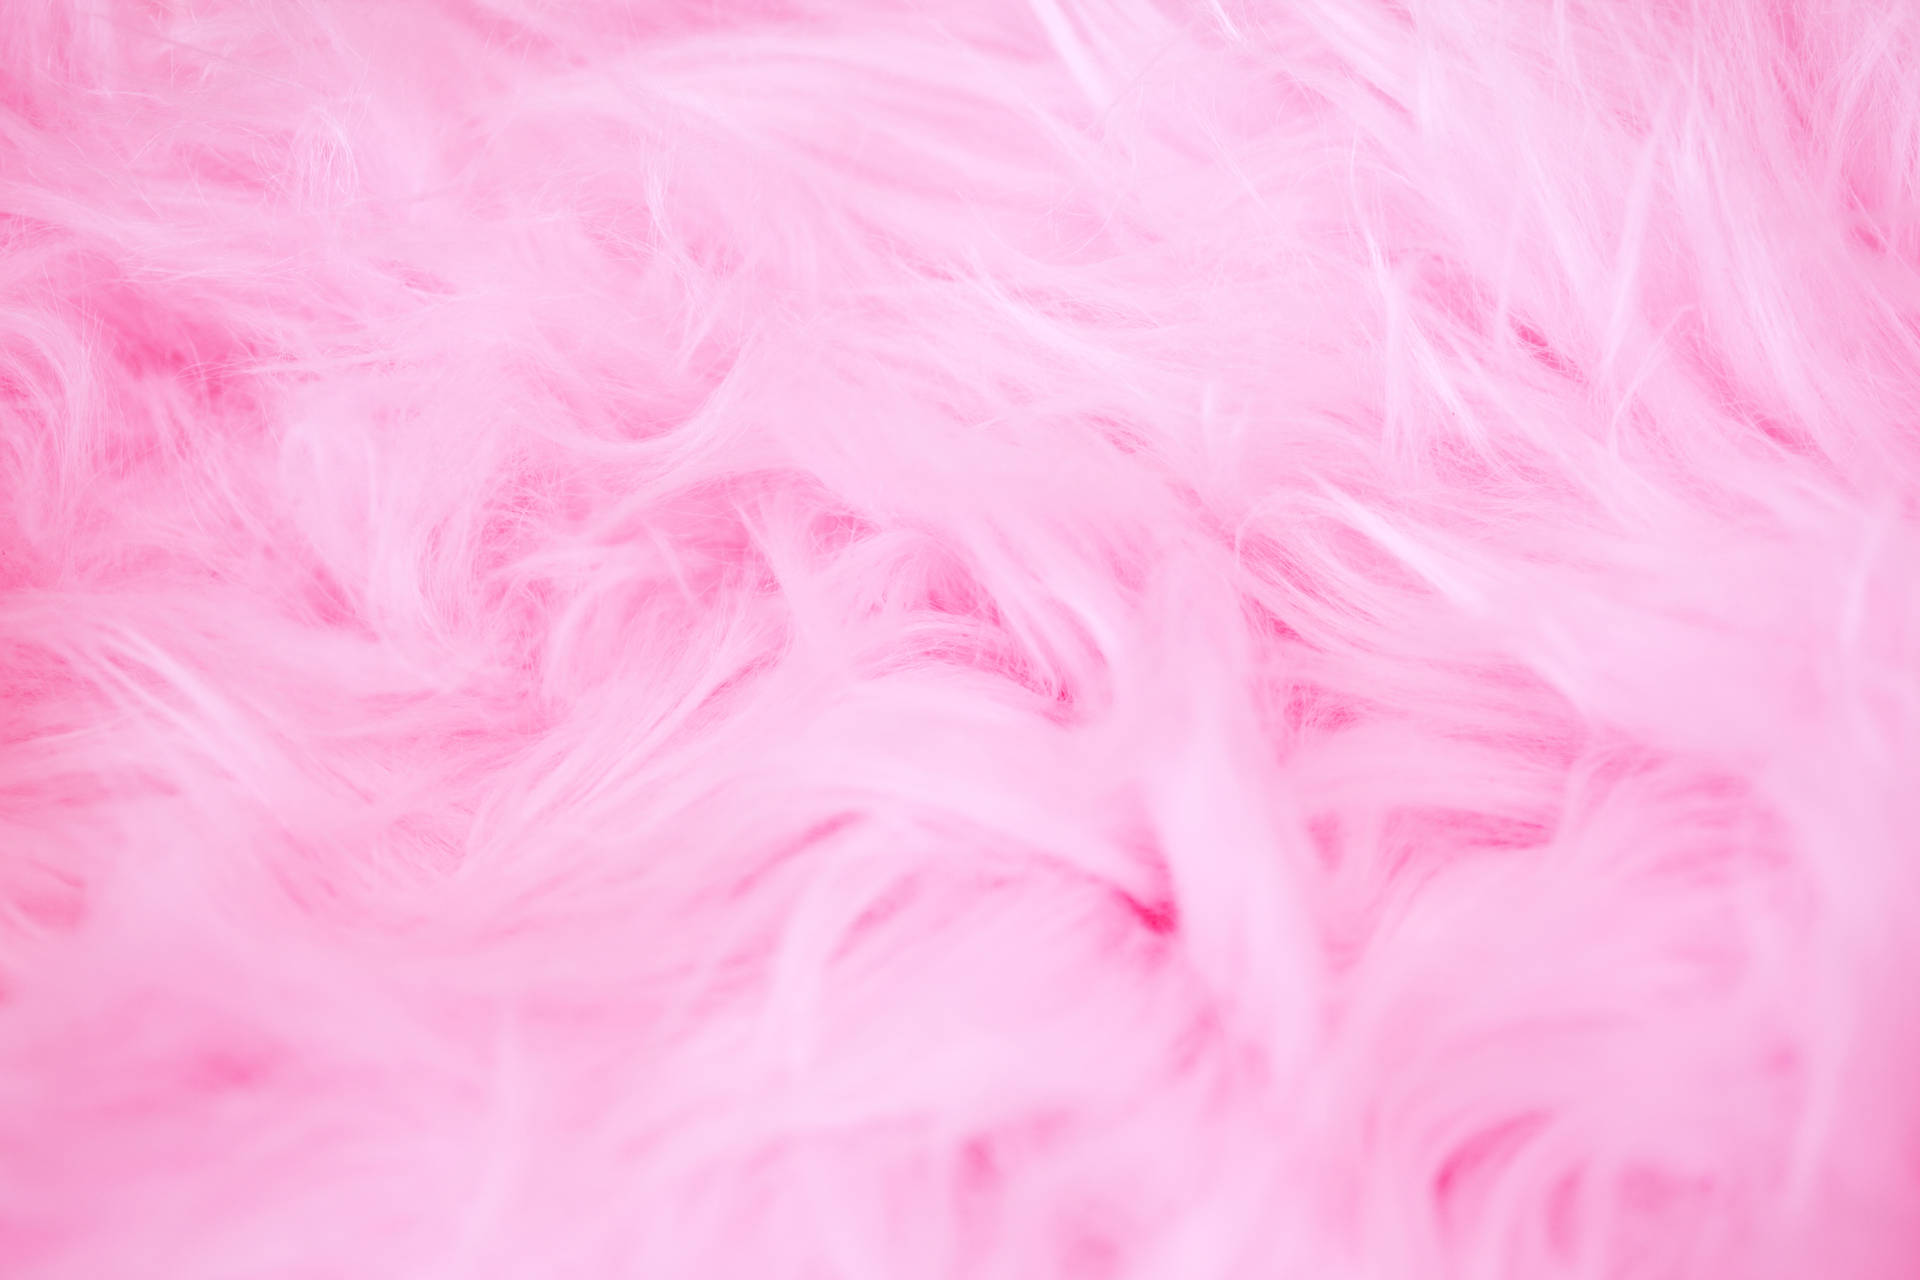 5616X3744 Pink Wallpaper and Background